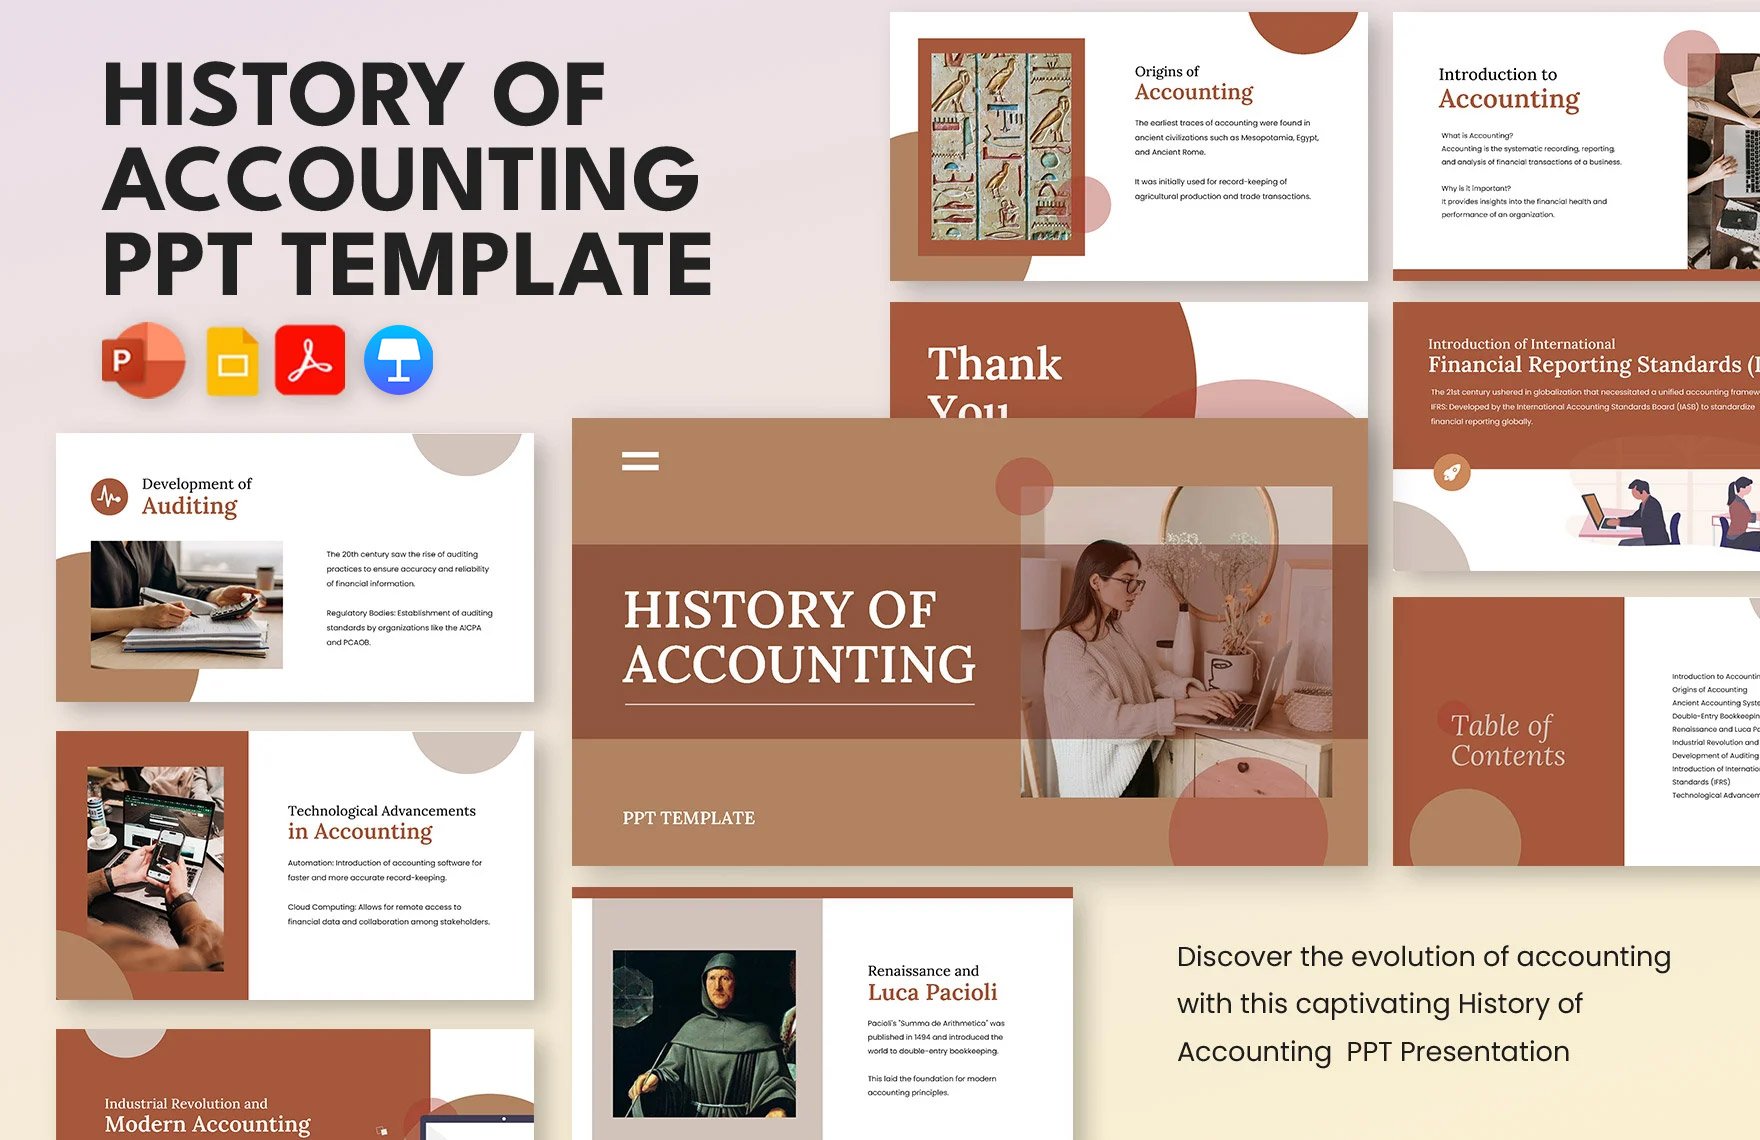 History of Accounting PPT Template in PDF, PowerPoint, Google Slides, Apple Keynote